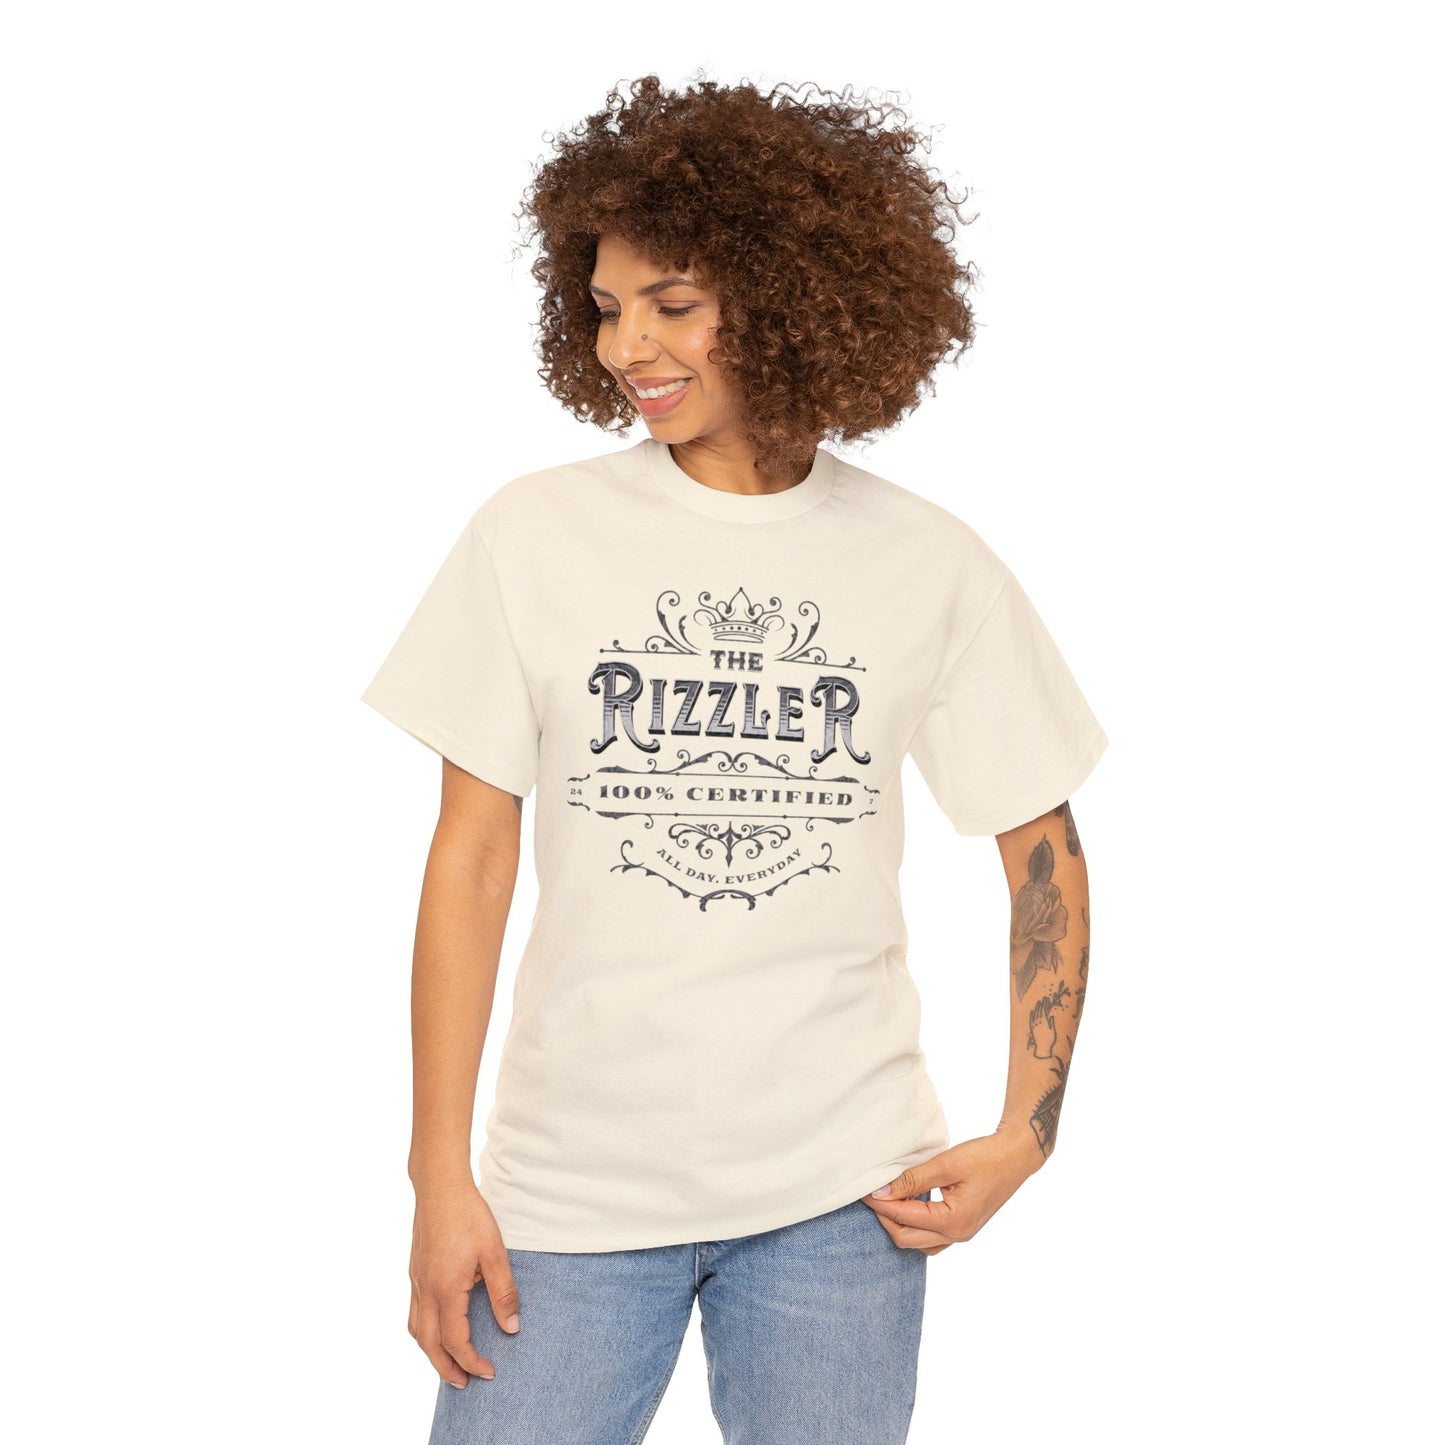 The Rizzler T-Shirt